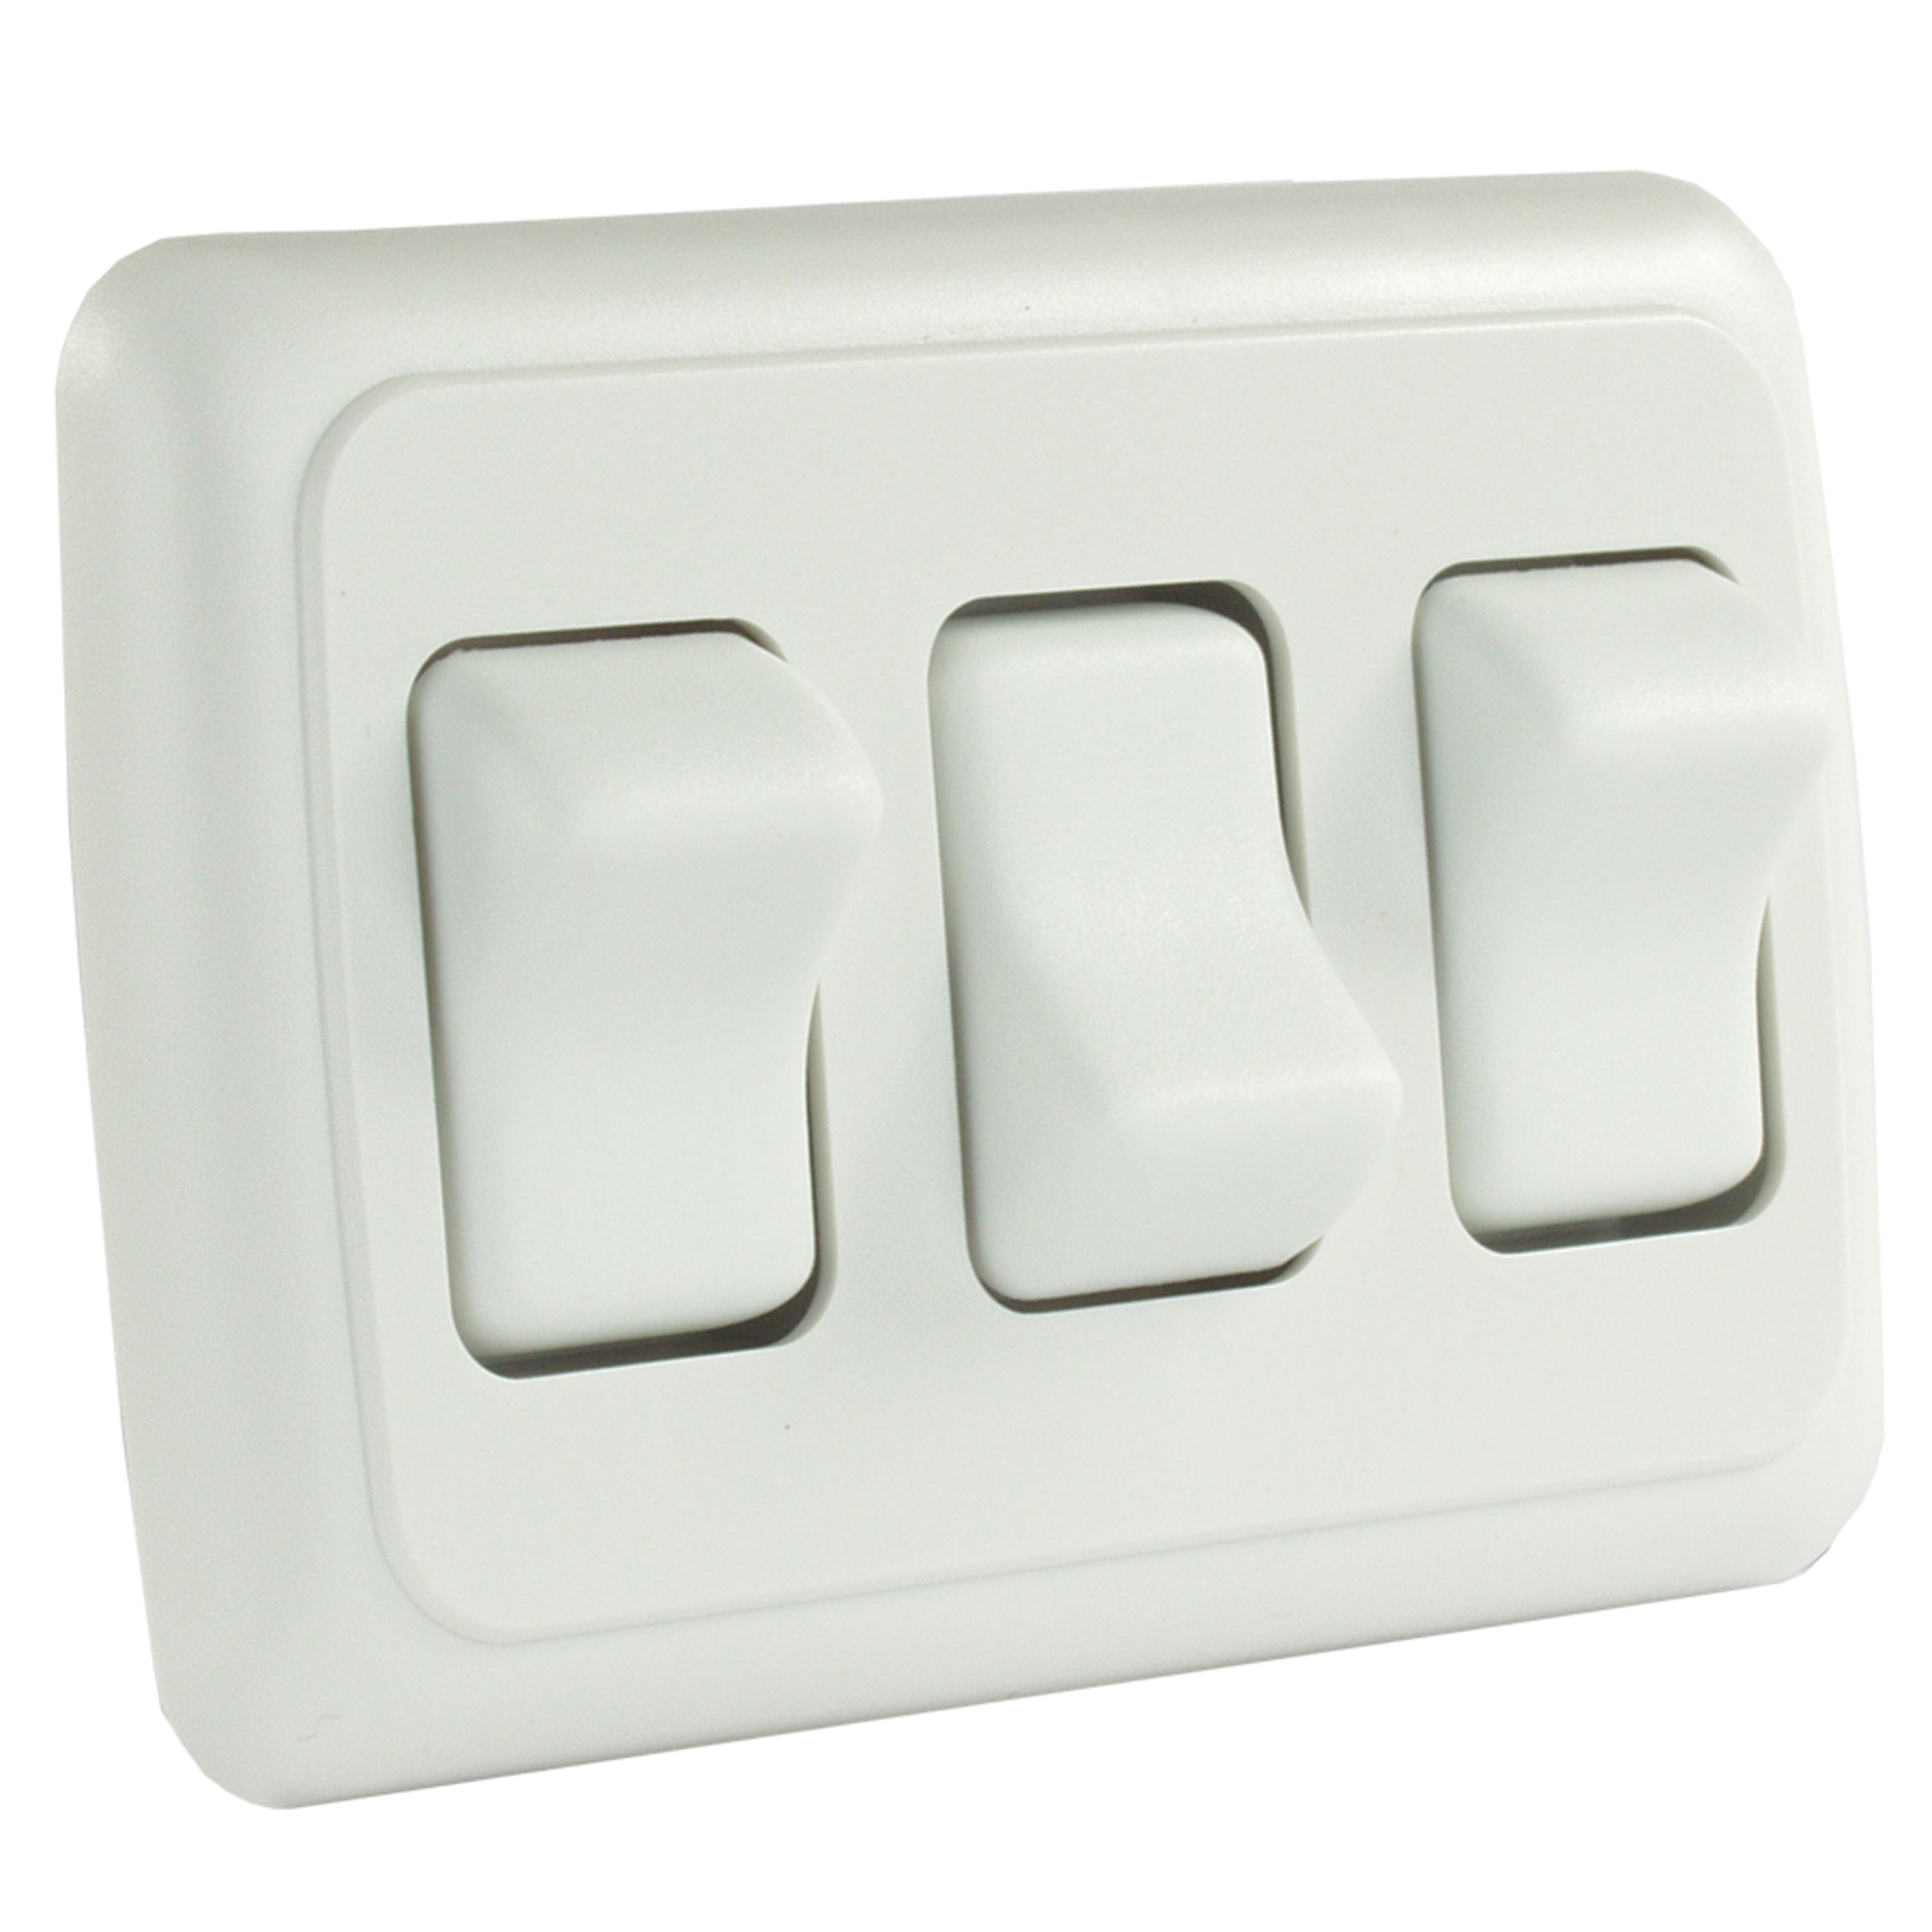 JR Products 12025 On/Off Switch with Bezel - Triple Switch, White